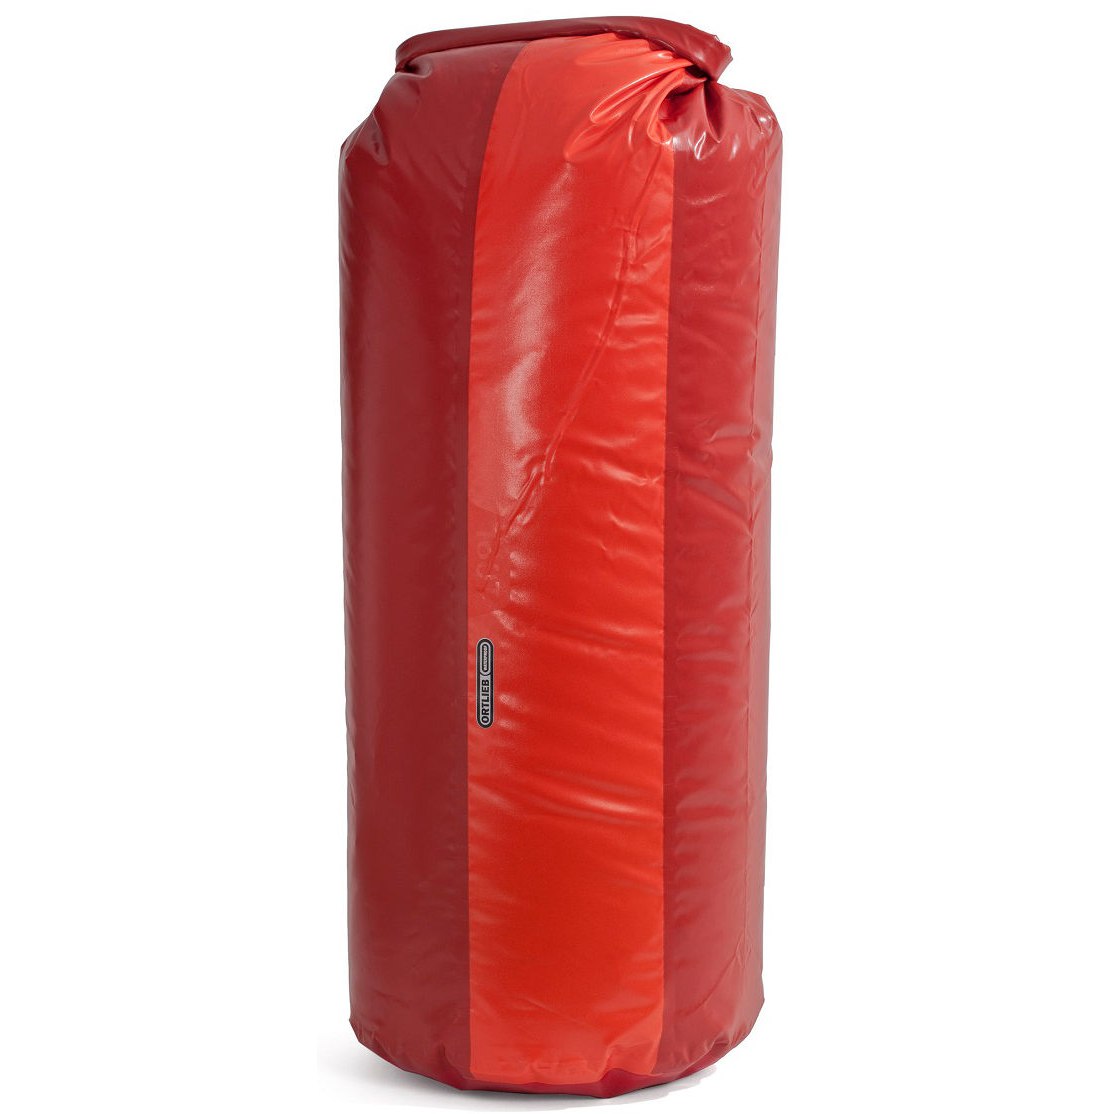 Image of ORTLIEB Dry-Bag PD350 - 109L - cranberry-signal red